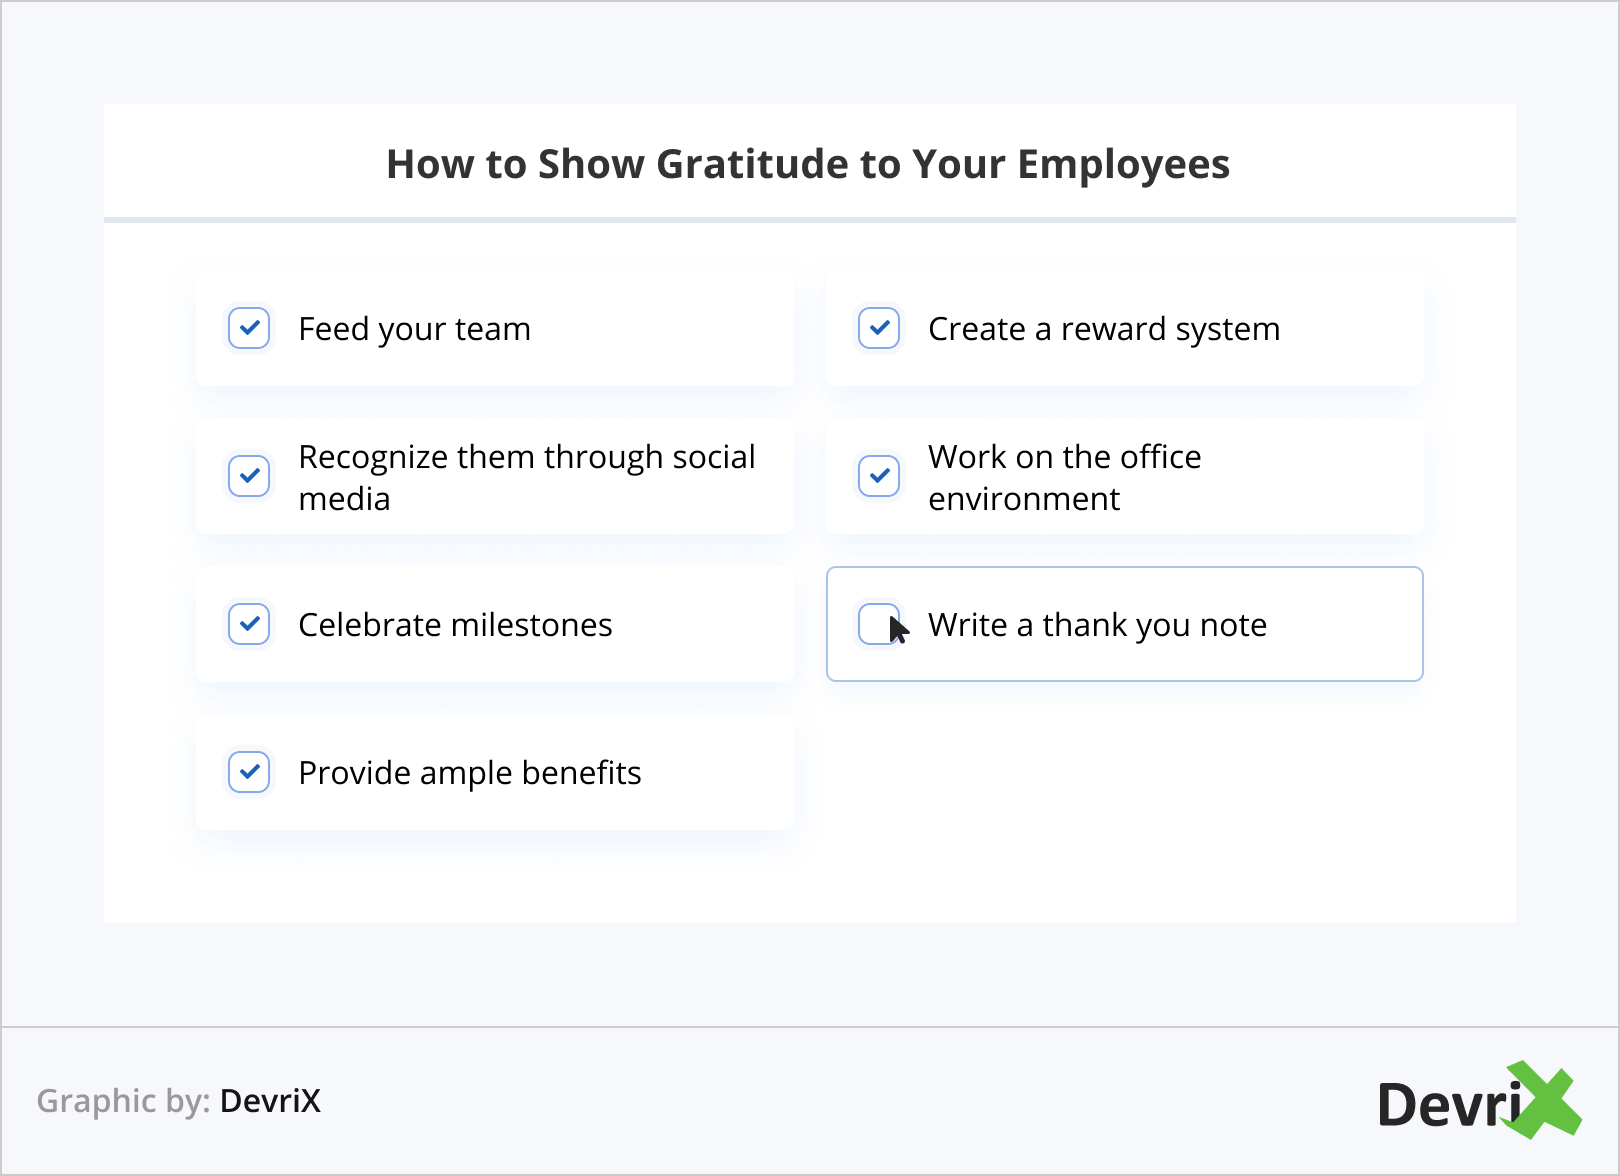 How to Show Gratitude to Your Employees